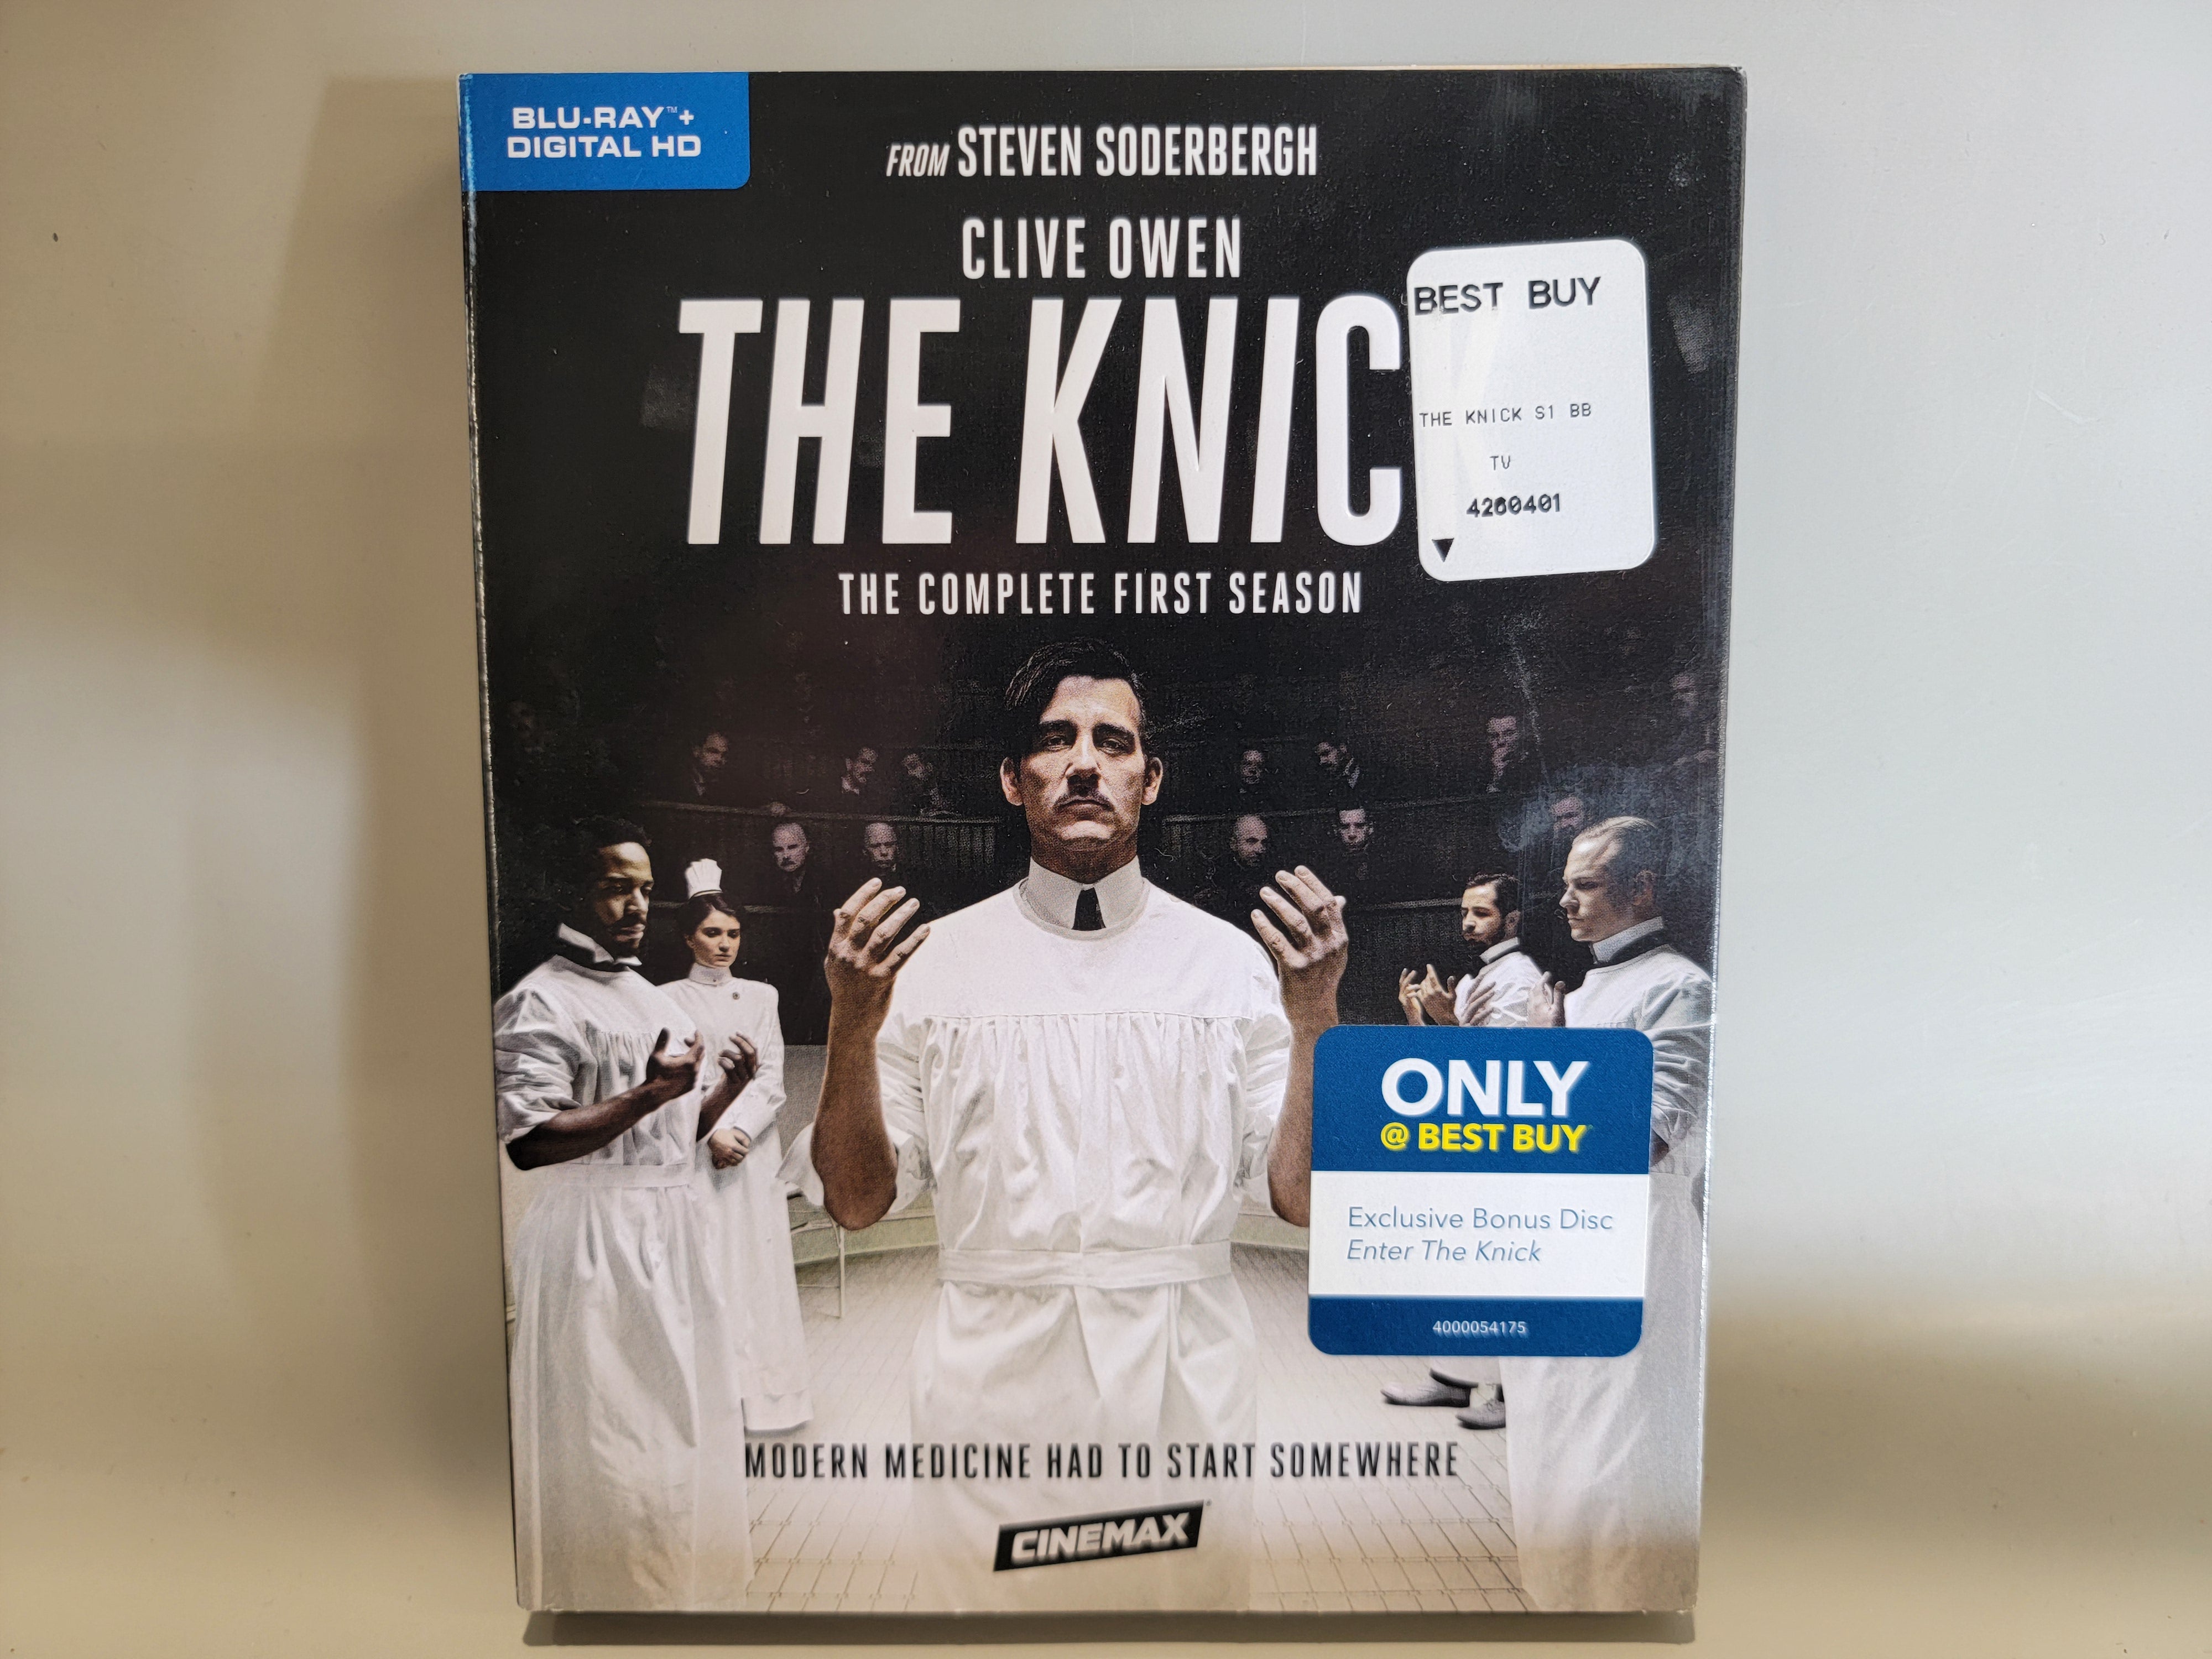 THE KNICK: THE COMPLETE FIRST SEASON BLU-RAY [USED]